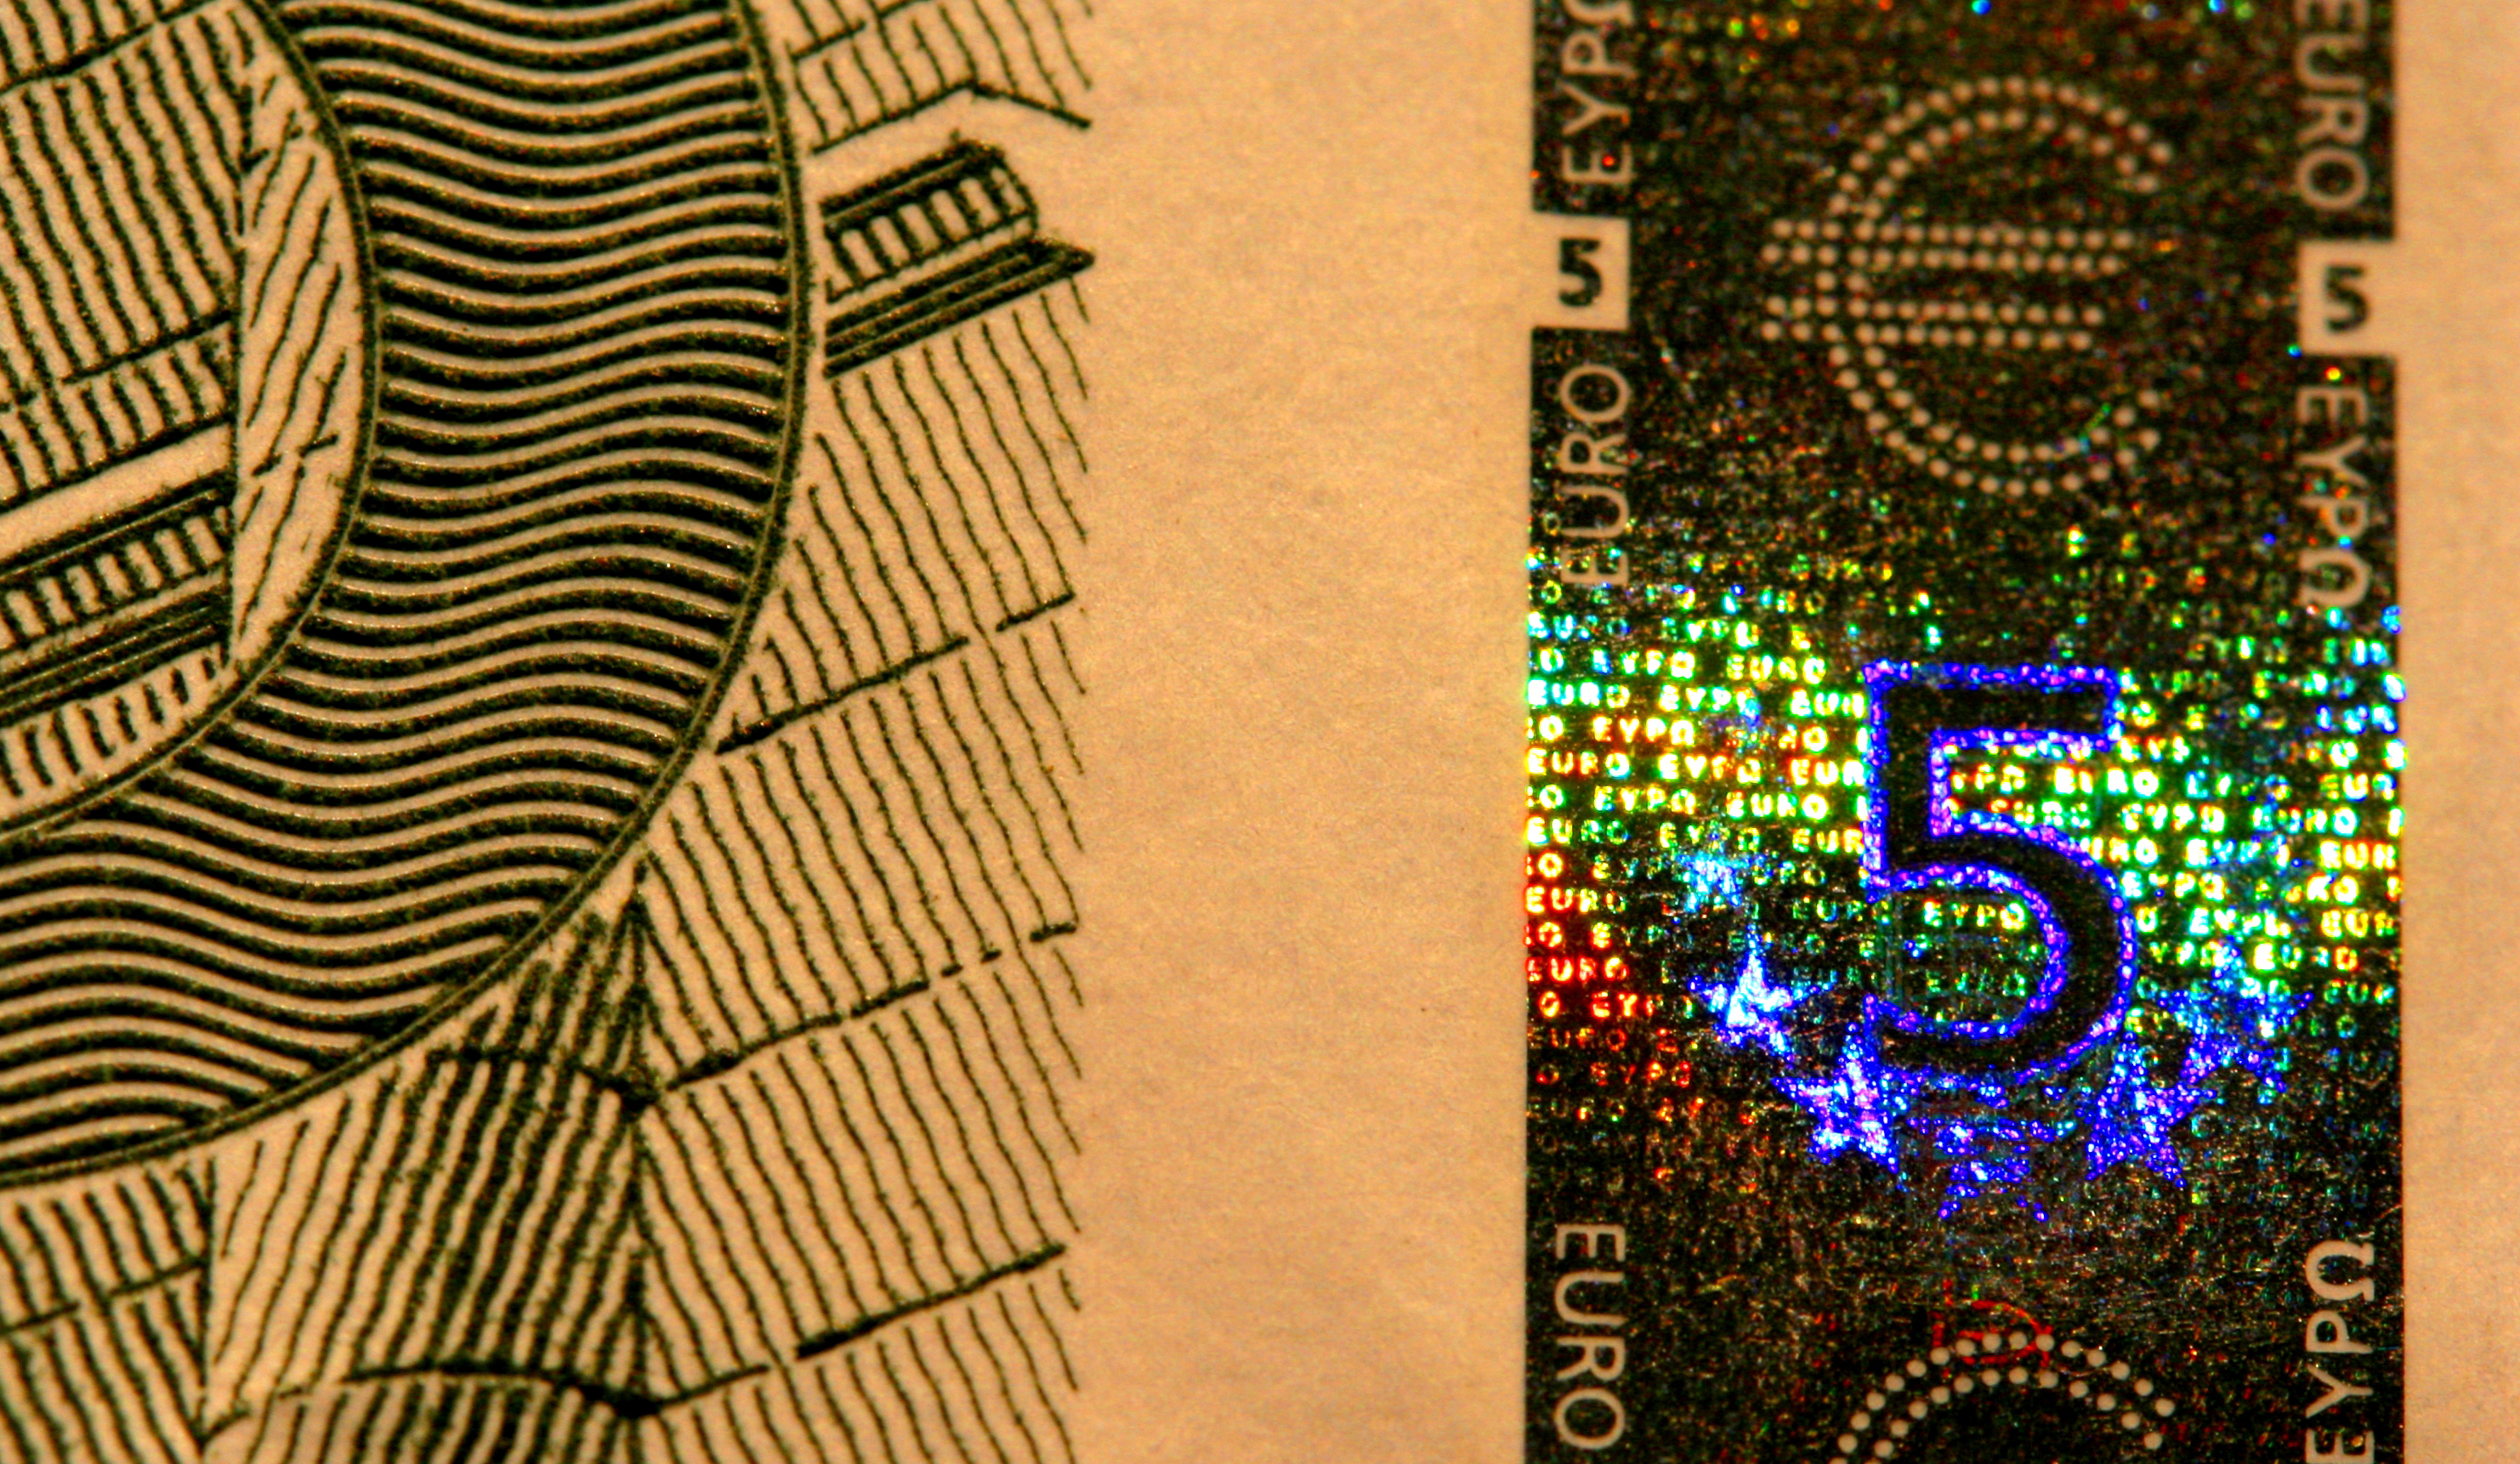 EUR 5 holographic band